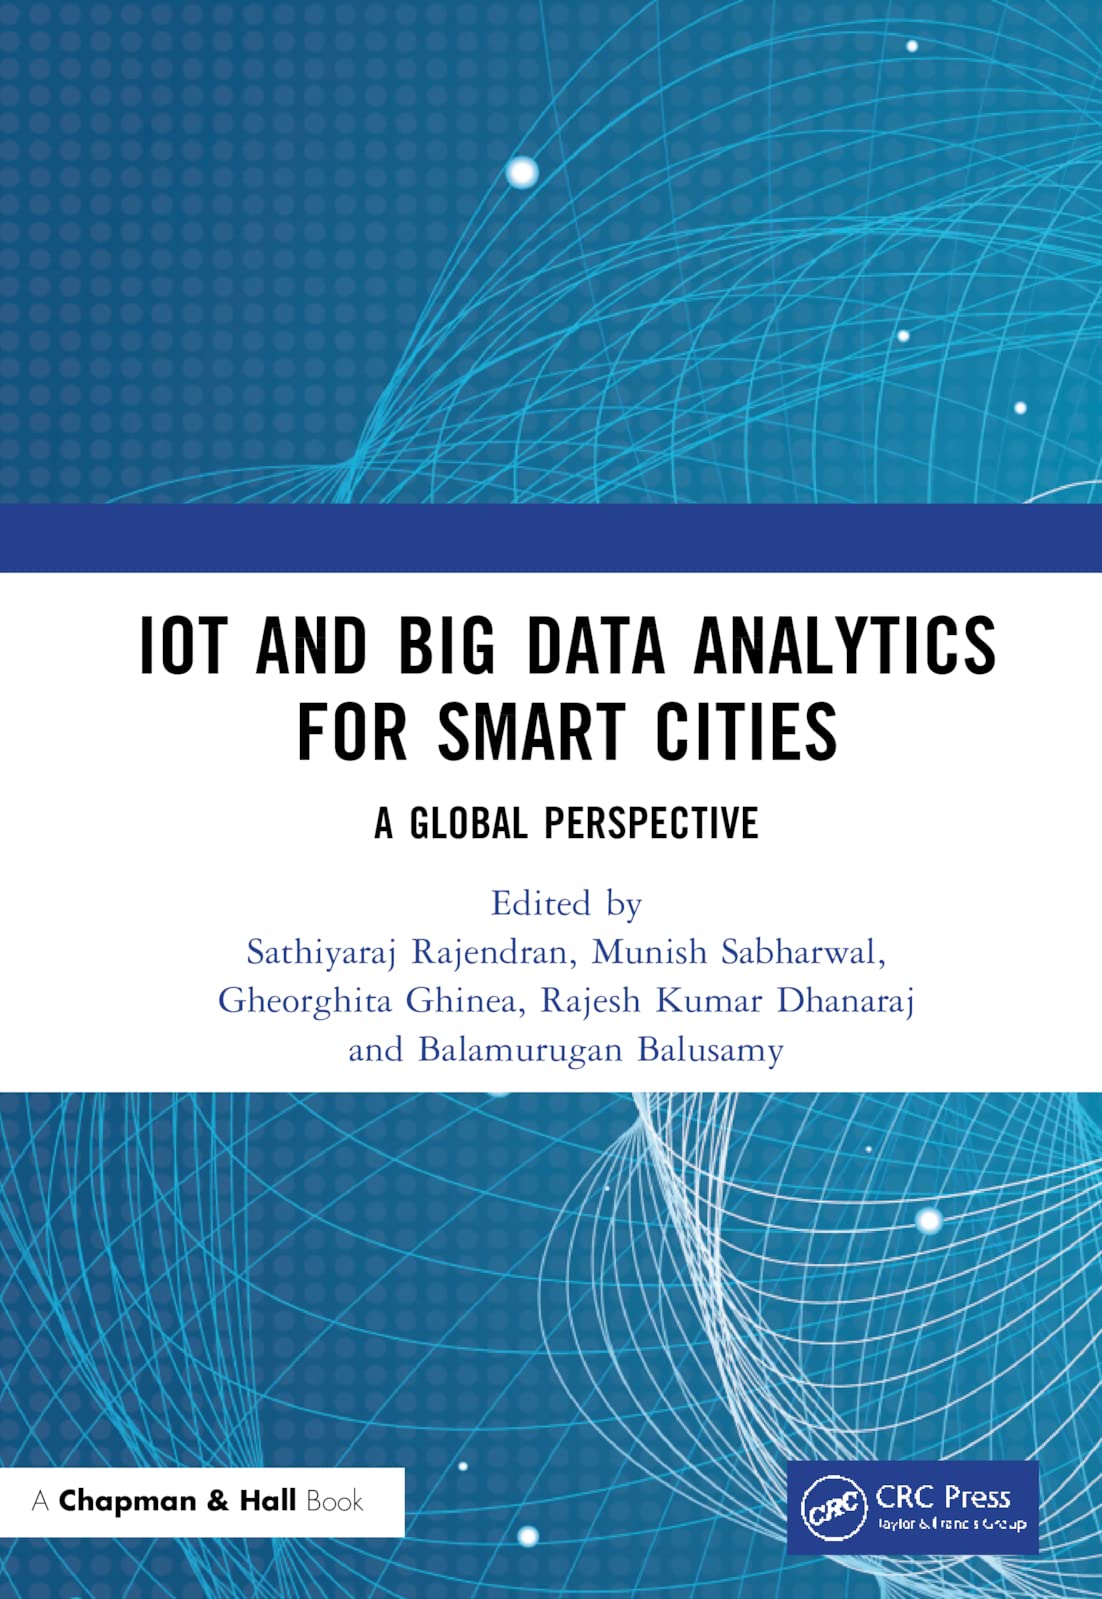 IoT and Big Data Analytics for Smart Cities book cover